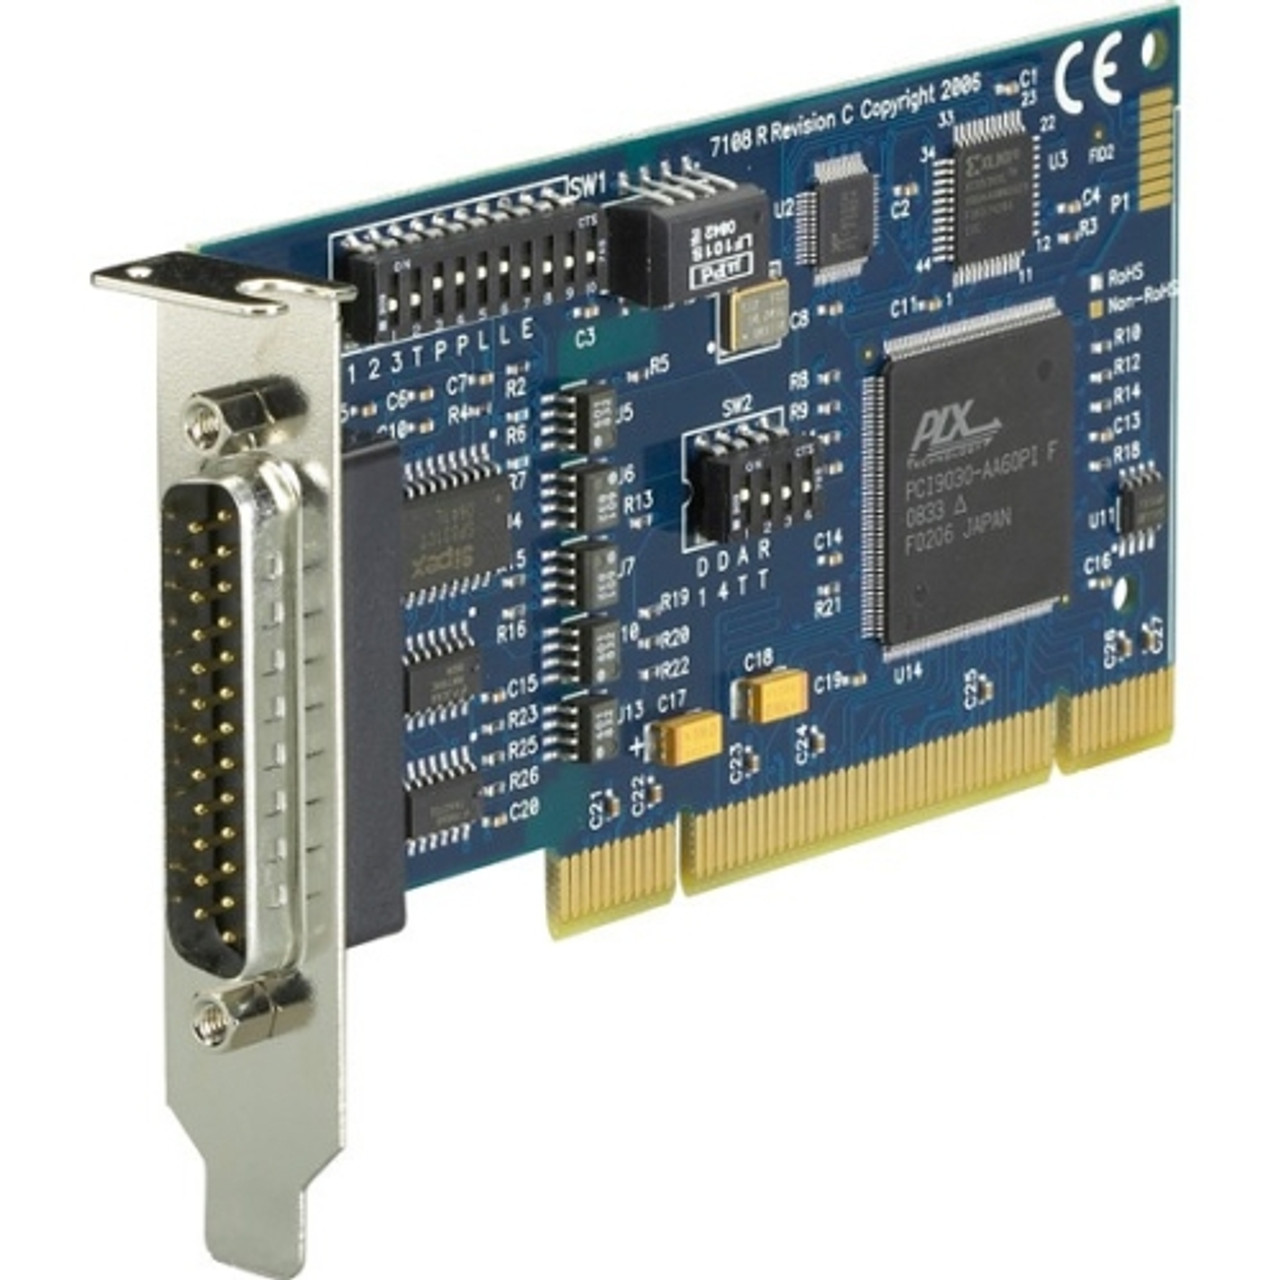 IC972C-R2 Black Box RS-232/422/485 PCI Card 1-Port Low Profile with Opto Isolation